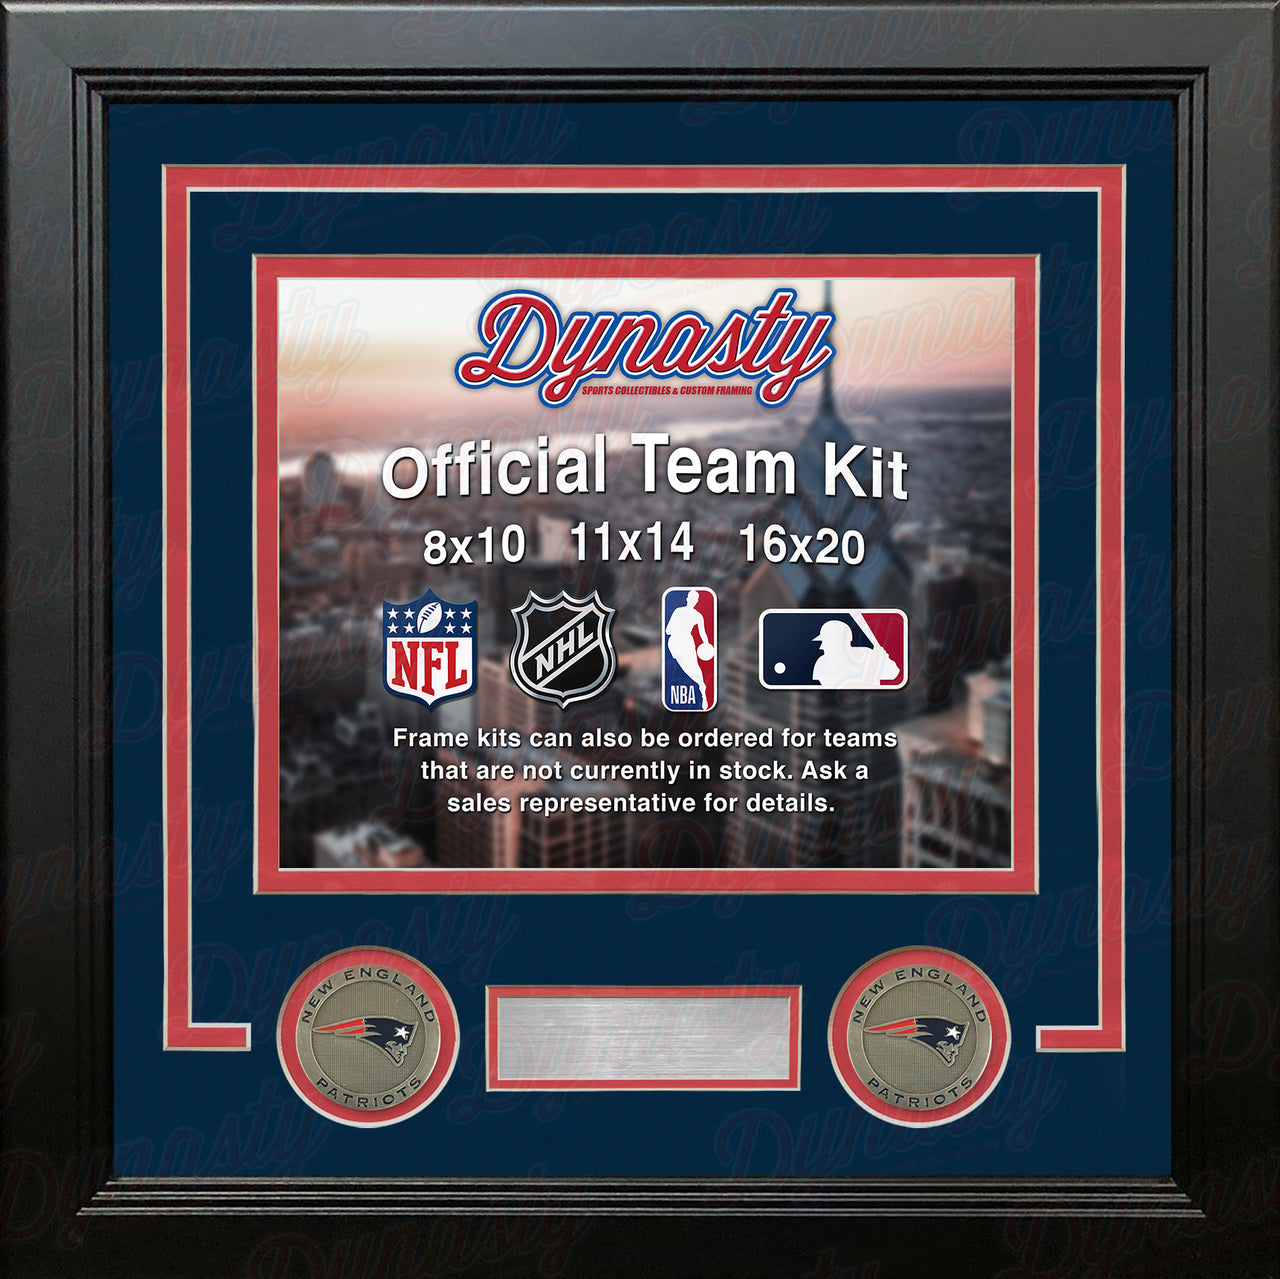 NFL Football Photo Picture Frame Kit - New England Patriots (Navy Matting, Red Trim) - Dynasty Sports & Framing 